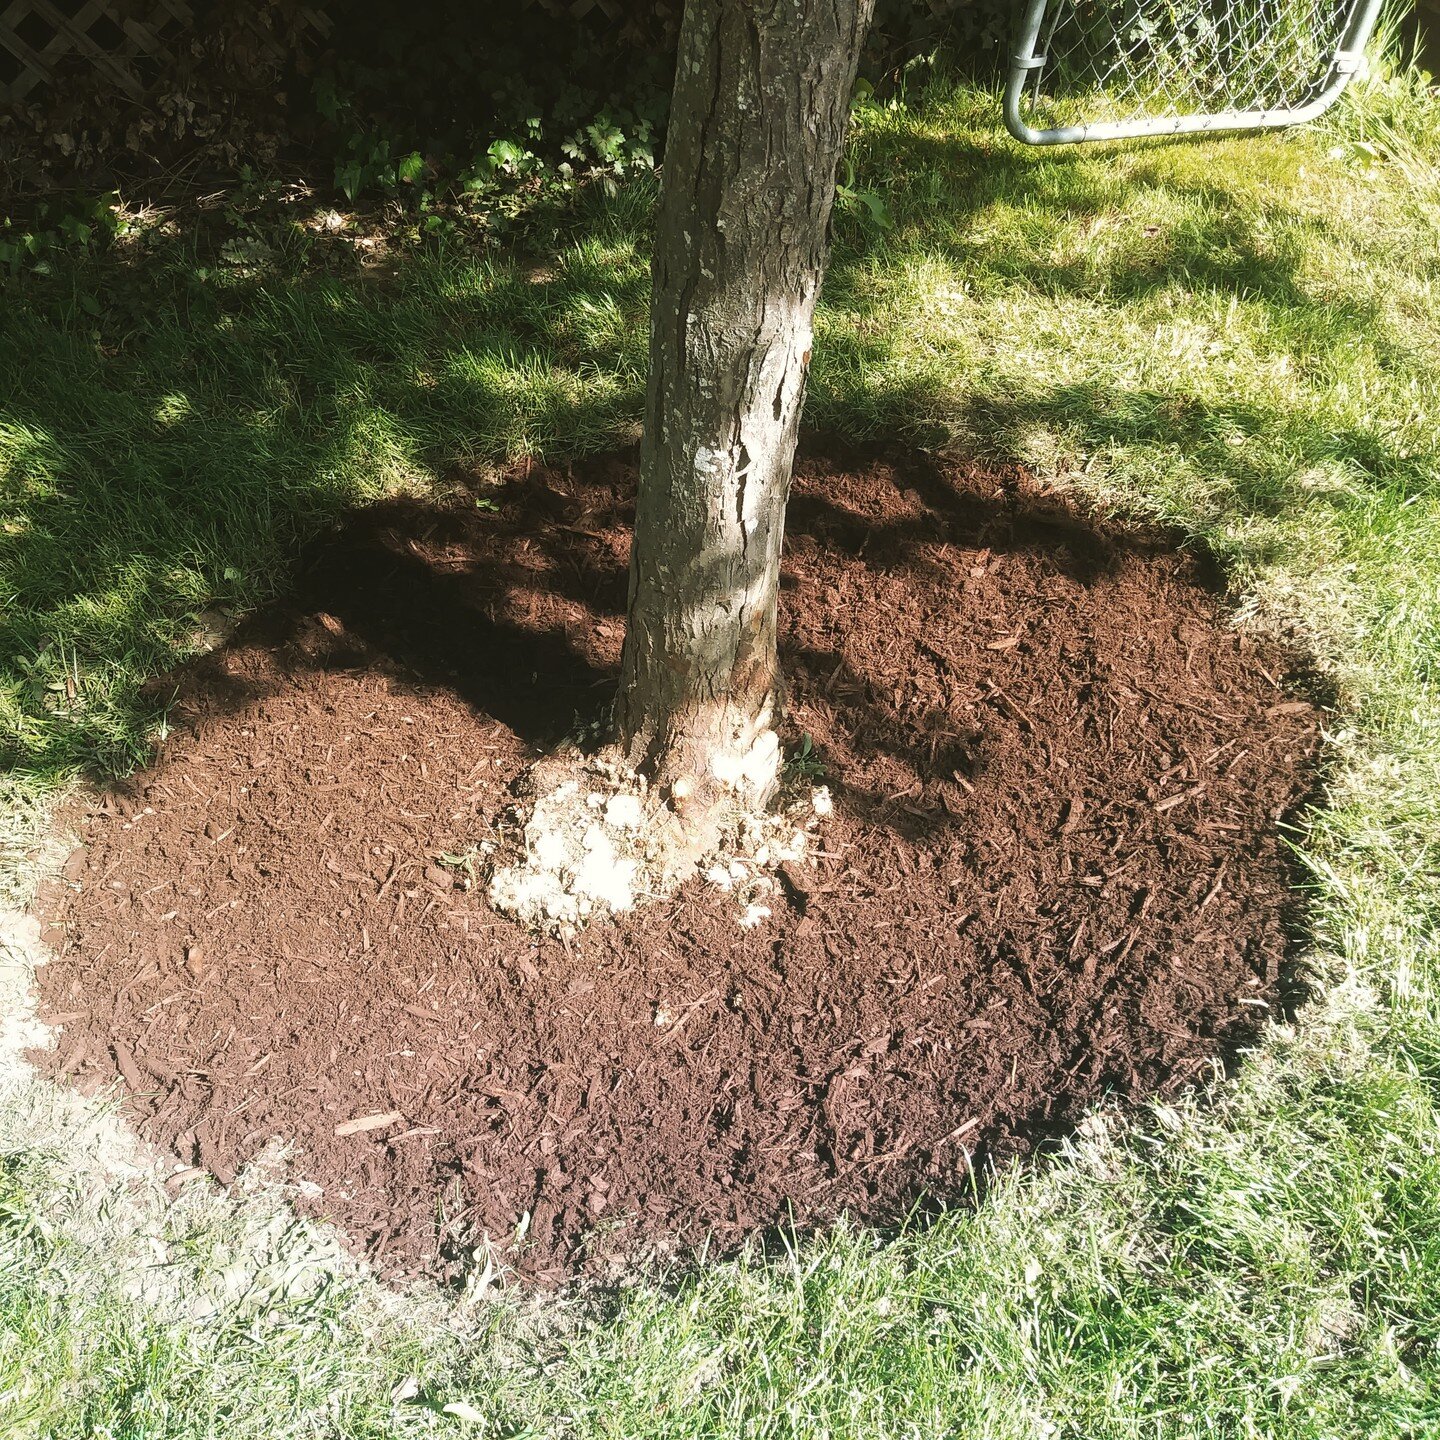 This tree was planted too deep, so we dug it out until we found the tree flare. The tree flare is where the tree expands at the base of the tree. After this, we fertilized and mulched.